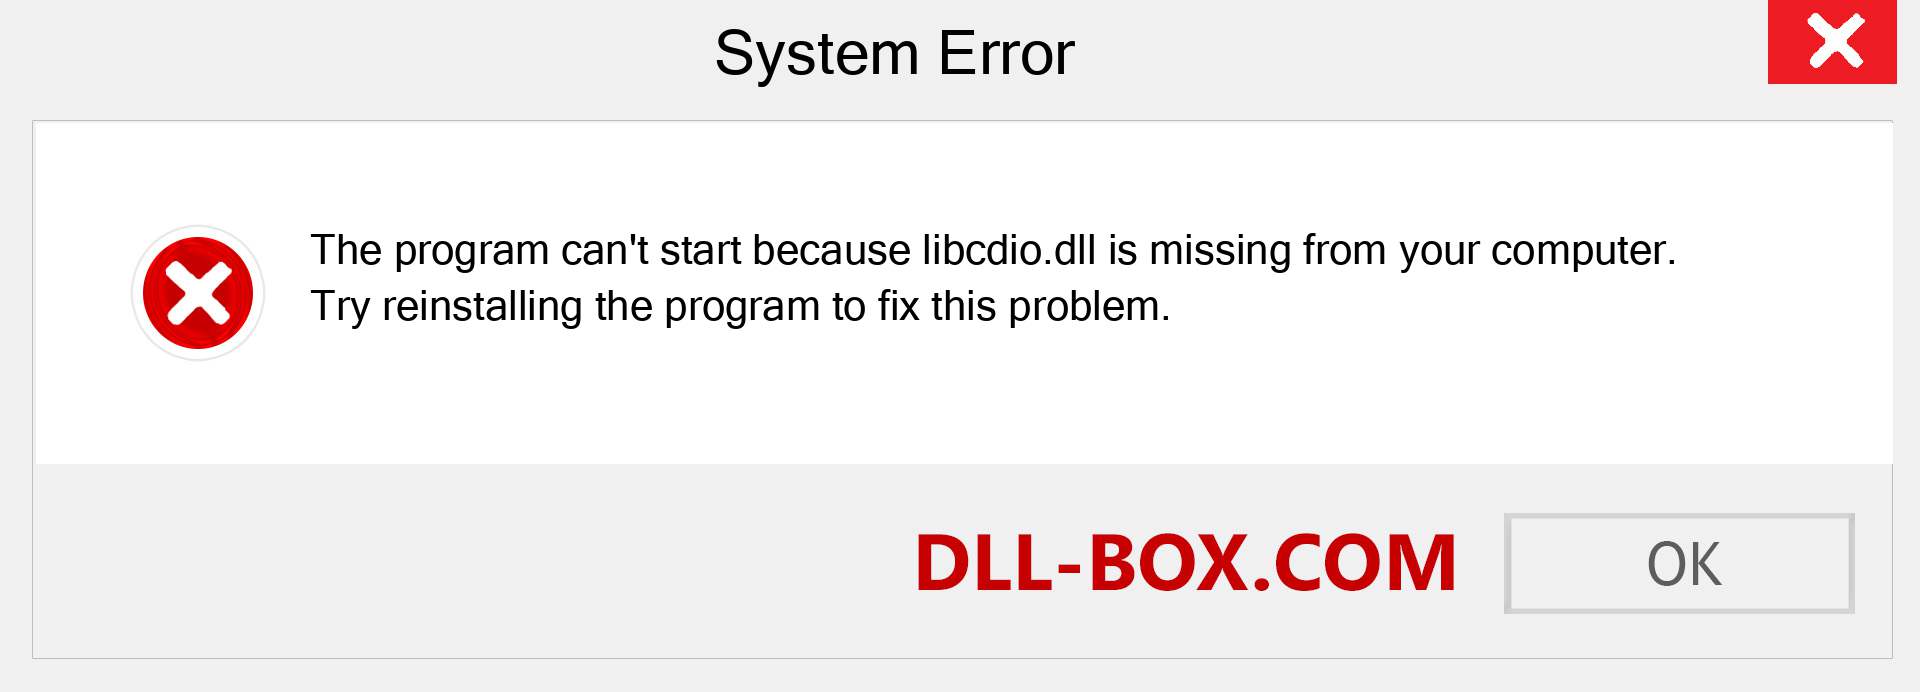  libcdio.dll file is missing?. Download for Windows 7, 8, 10 - Fix  libcdio dll Missing Error on Windows, photos, images